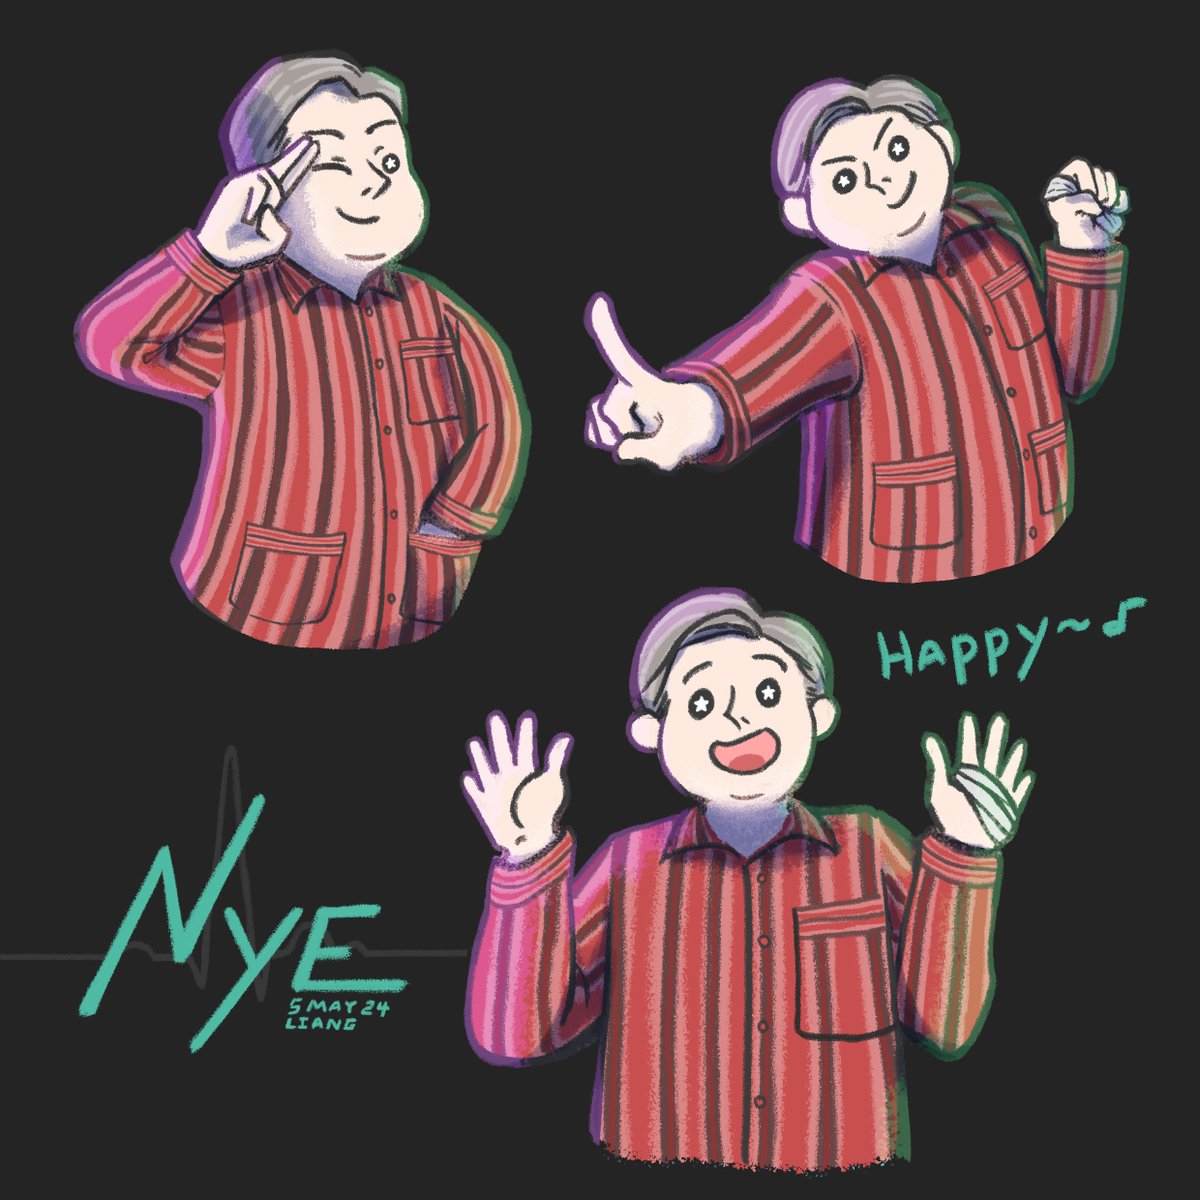 I can't stop drawing more of Michael Sheen as Nye🫠

#Nye #NationalTheatre #MichaelSheen